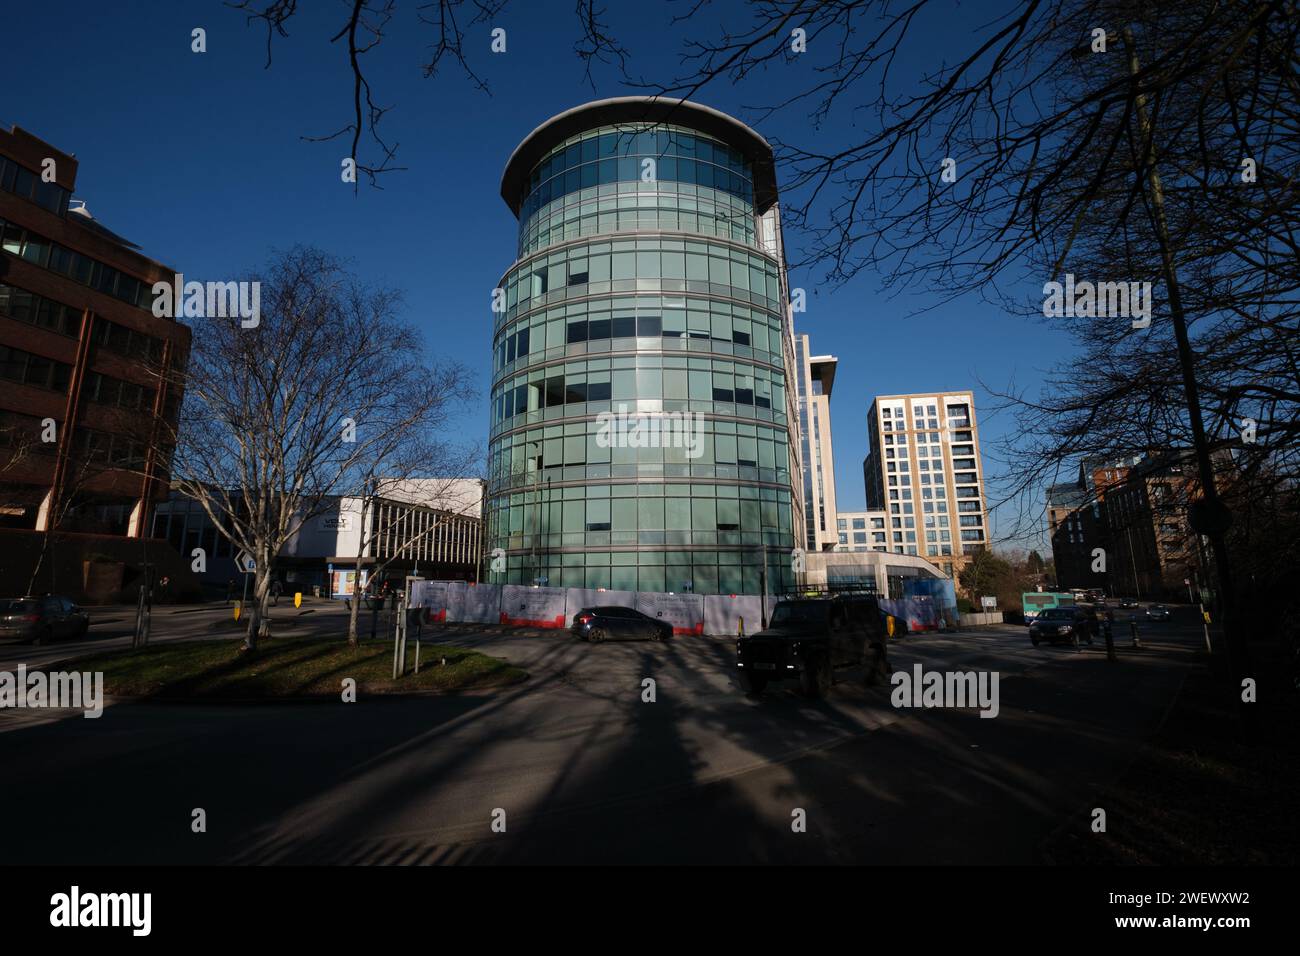 Kingsgate 62 High Street Redhill Surrey reigate England. Business centre with shared office space. Stock Photo